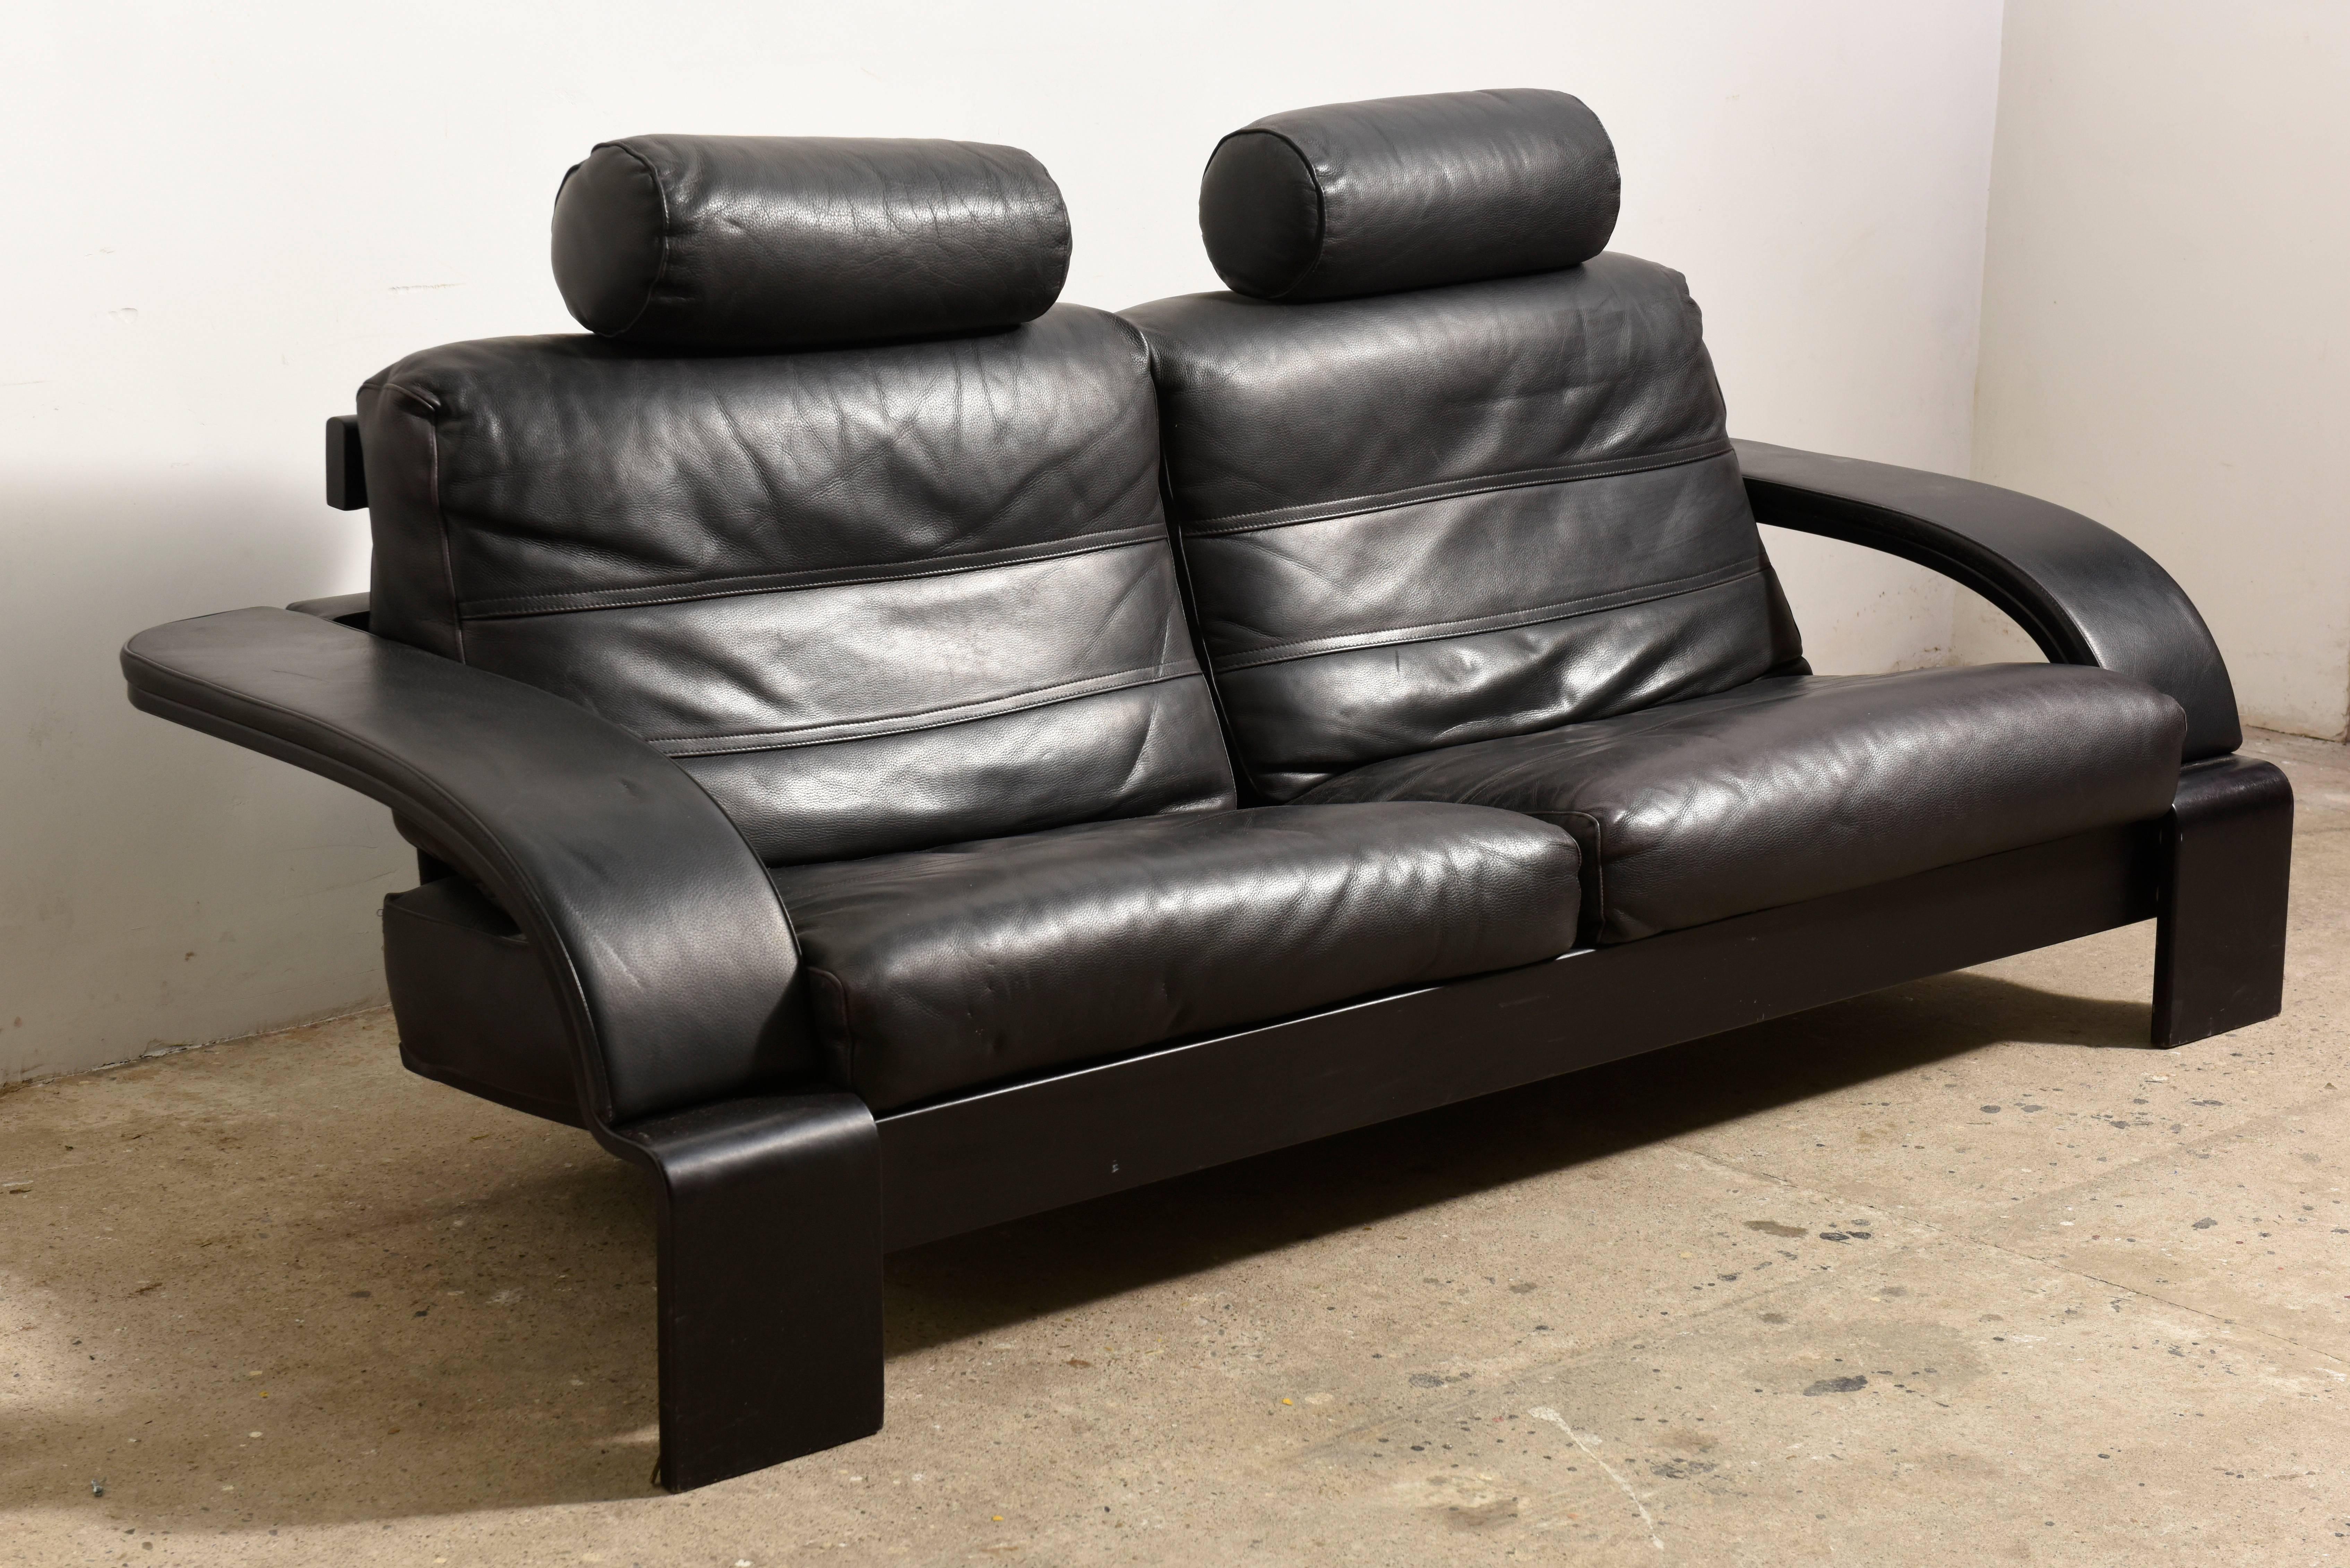 Superb Italian made vintage black leather sofa 1980s In a minimalistic and modern design, with convenient functions, made for pure comfort and flexibility.The design of the chair, the back and the armrest create an original detail in line design,